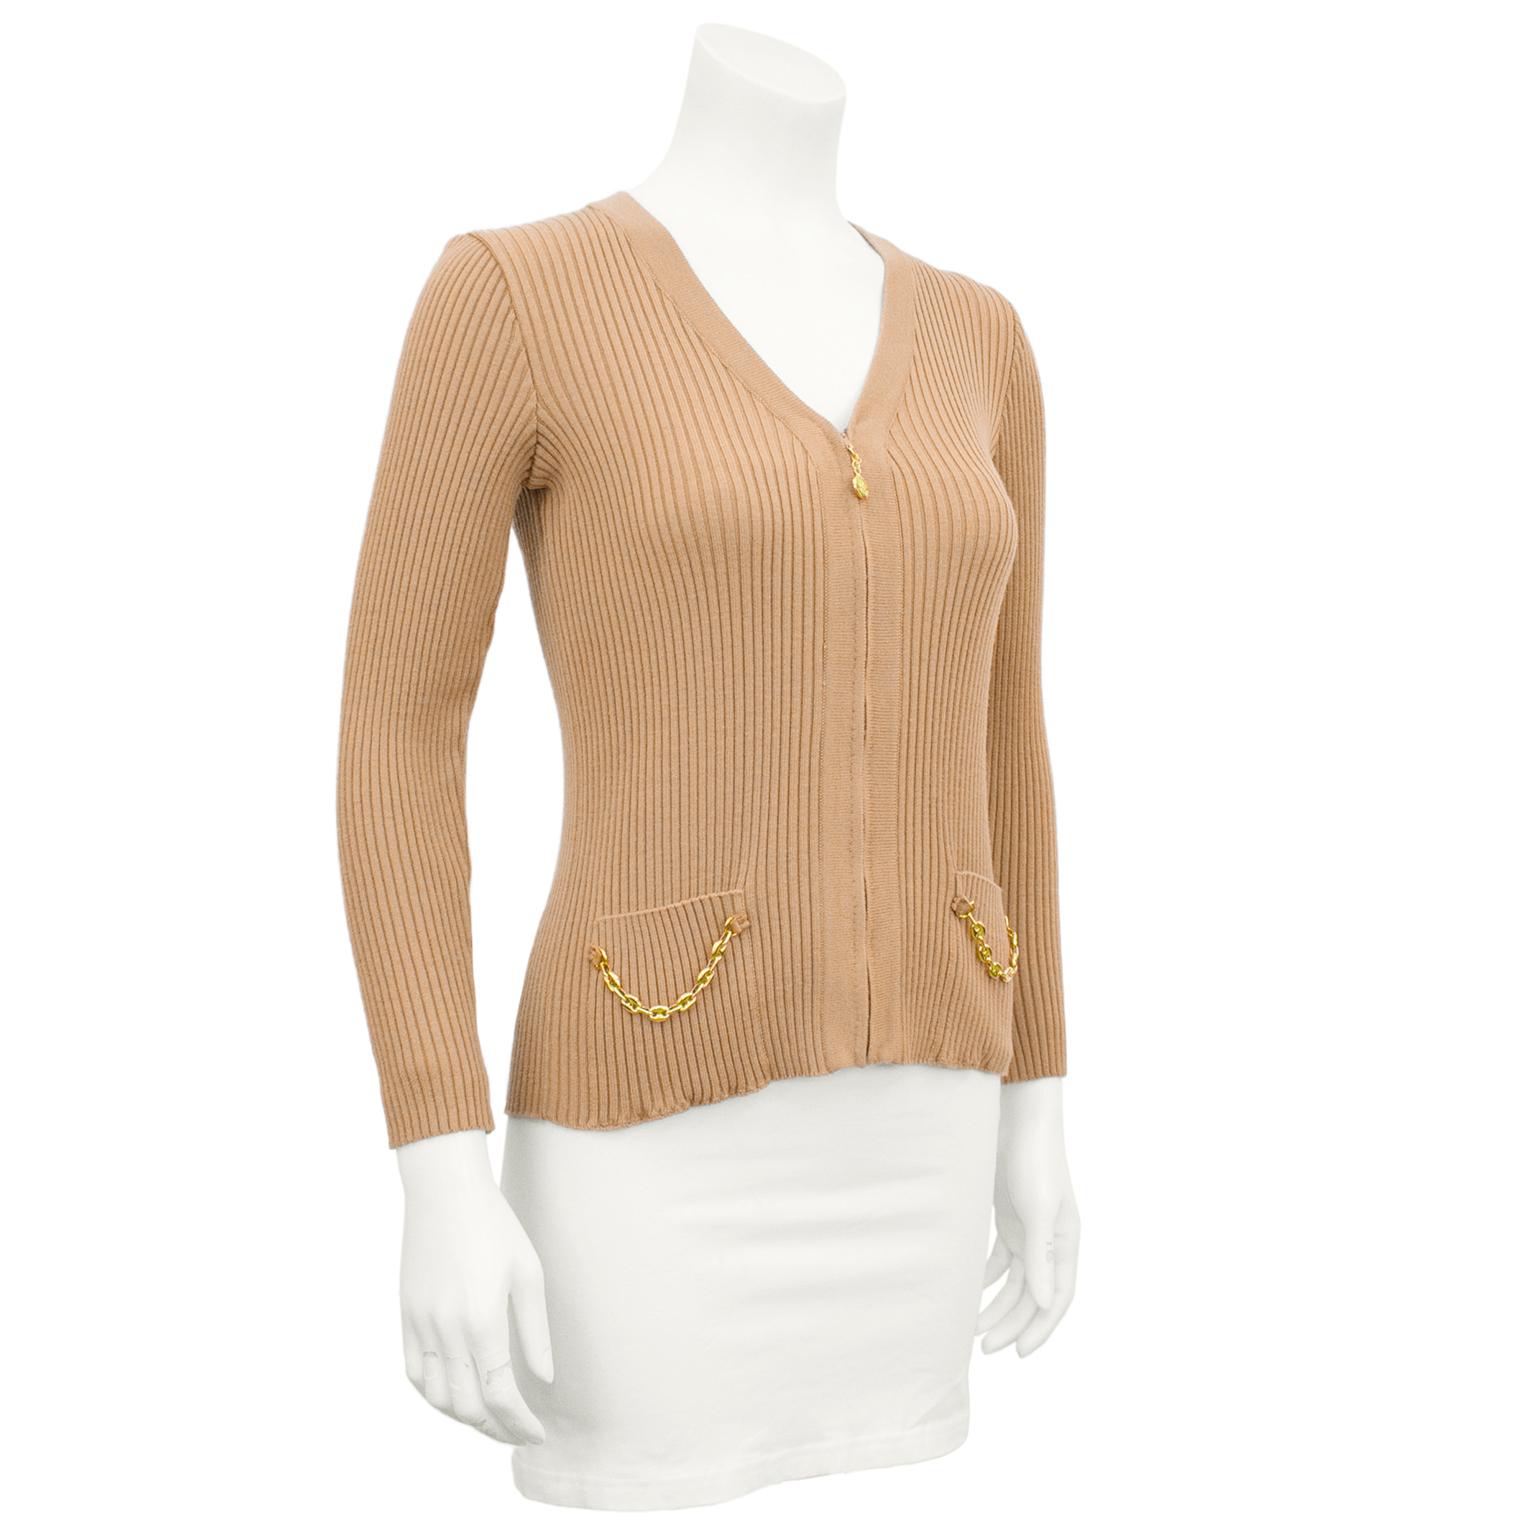 1970's Italian luxury brand Marelli ribbed wool cardigan. Tan wool with gold metal zip front. Gilt metal Marelli logo tag tops the zipper. Each patch pocket is enhanced with swagged gold metal chain inspired the Gucci oval link so popular in the